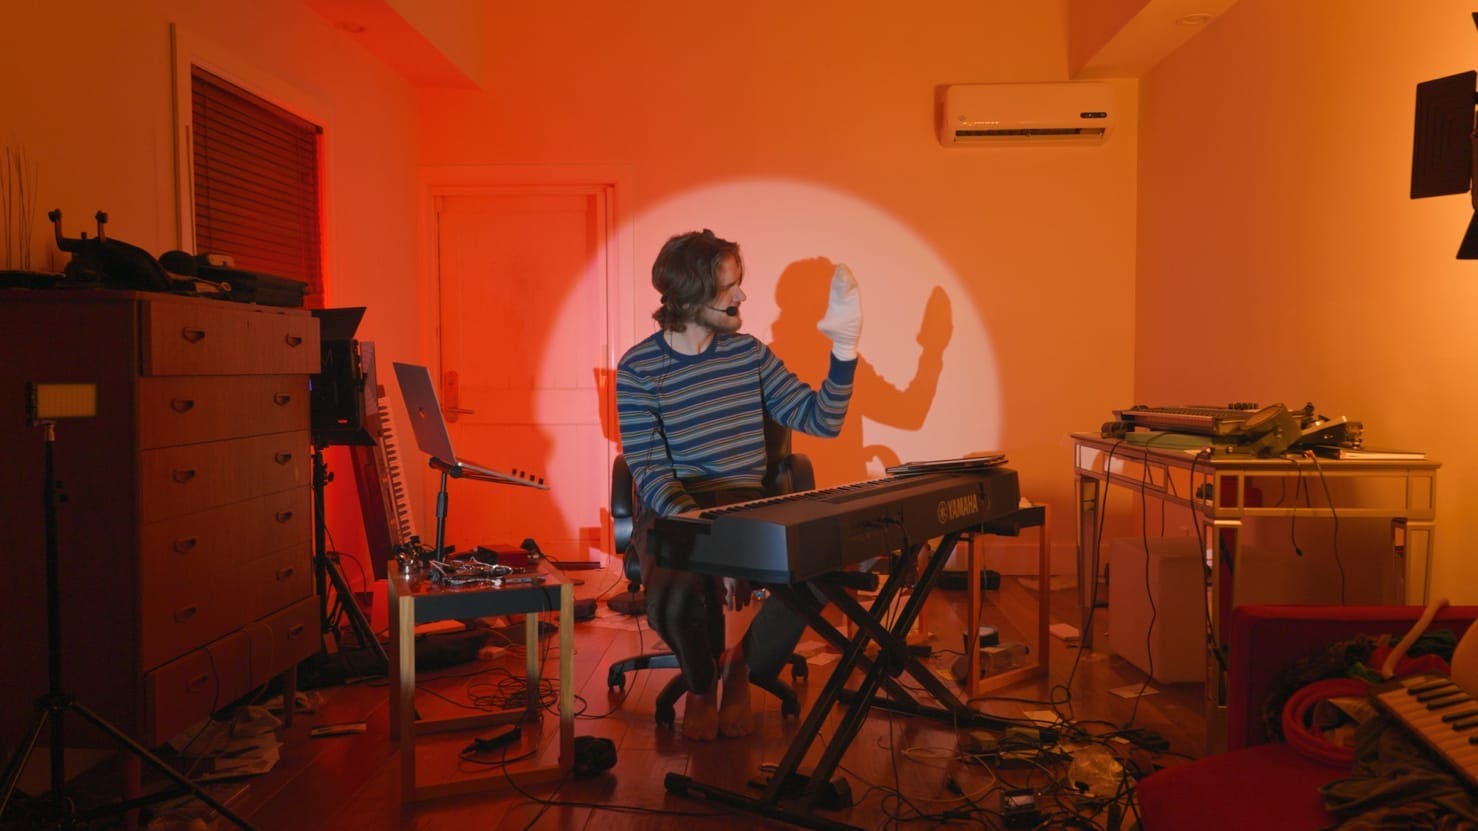 Bo Burnham performs on a keyboard with a sock puppet. He is lit by a spotlight, and the room is tinted red, orange, and yellow. There is also a dresser, computer and stand, table, and stool in the room. The floor is messy with a range of objects, mainly cords.